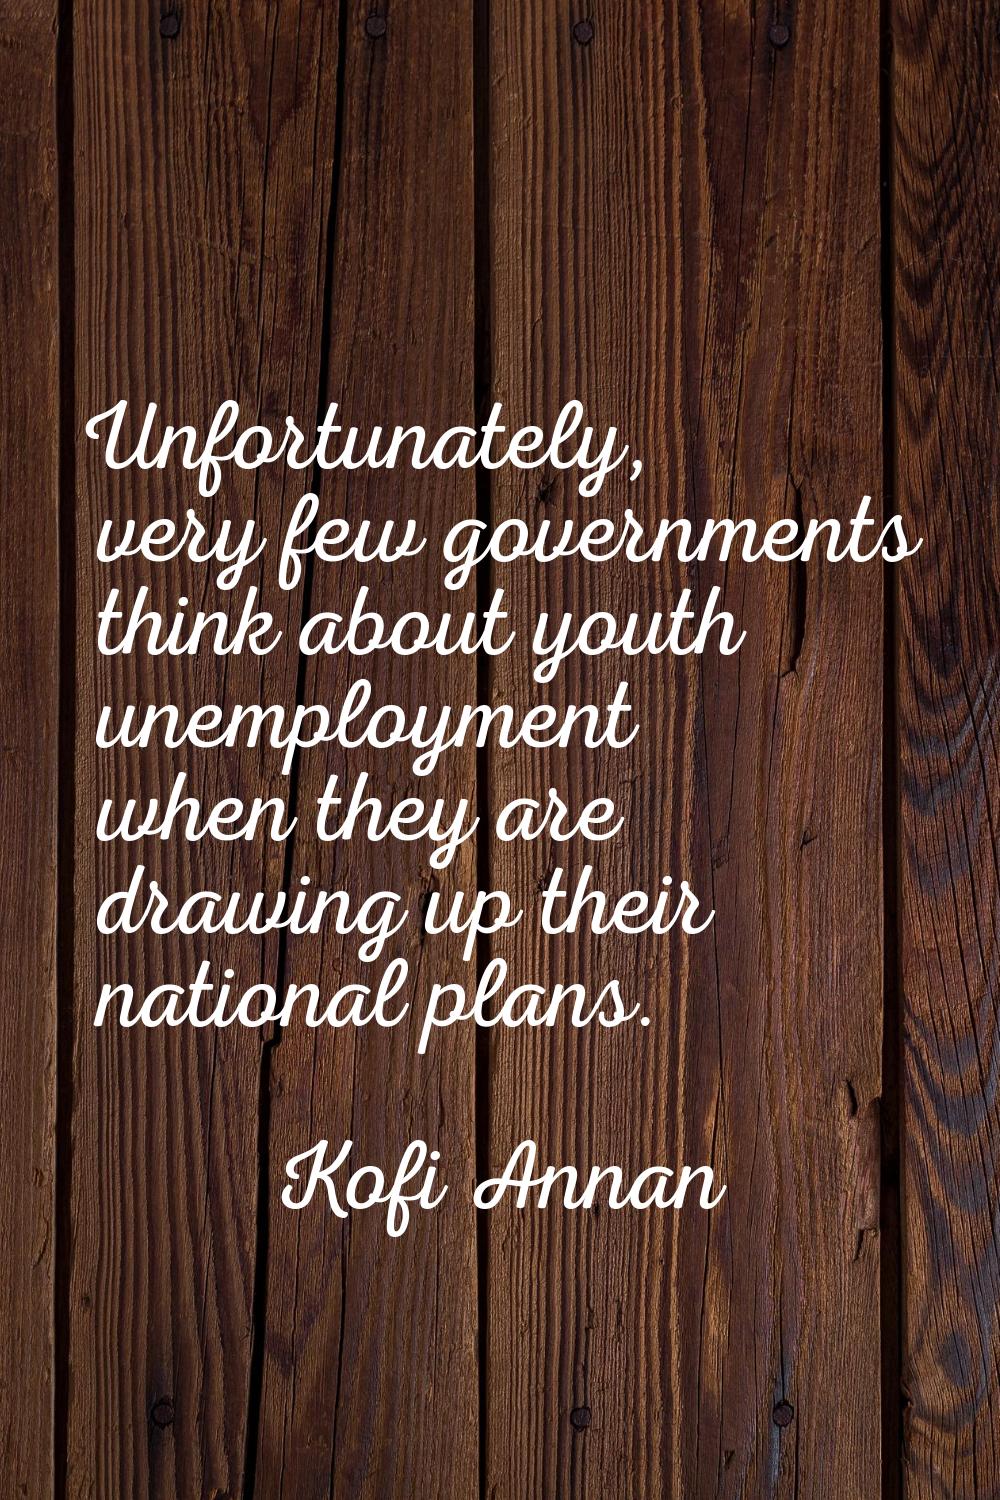 Unfortunately, very few governments think about youth unemployment when they are drawing up their n